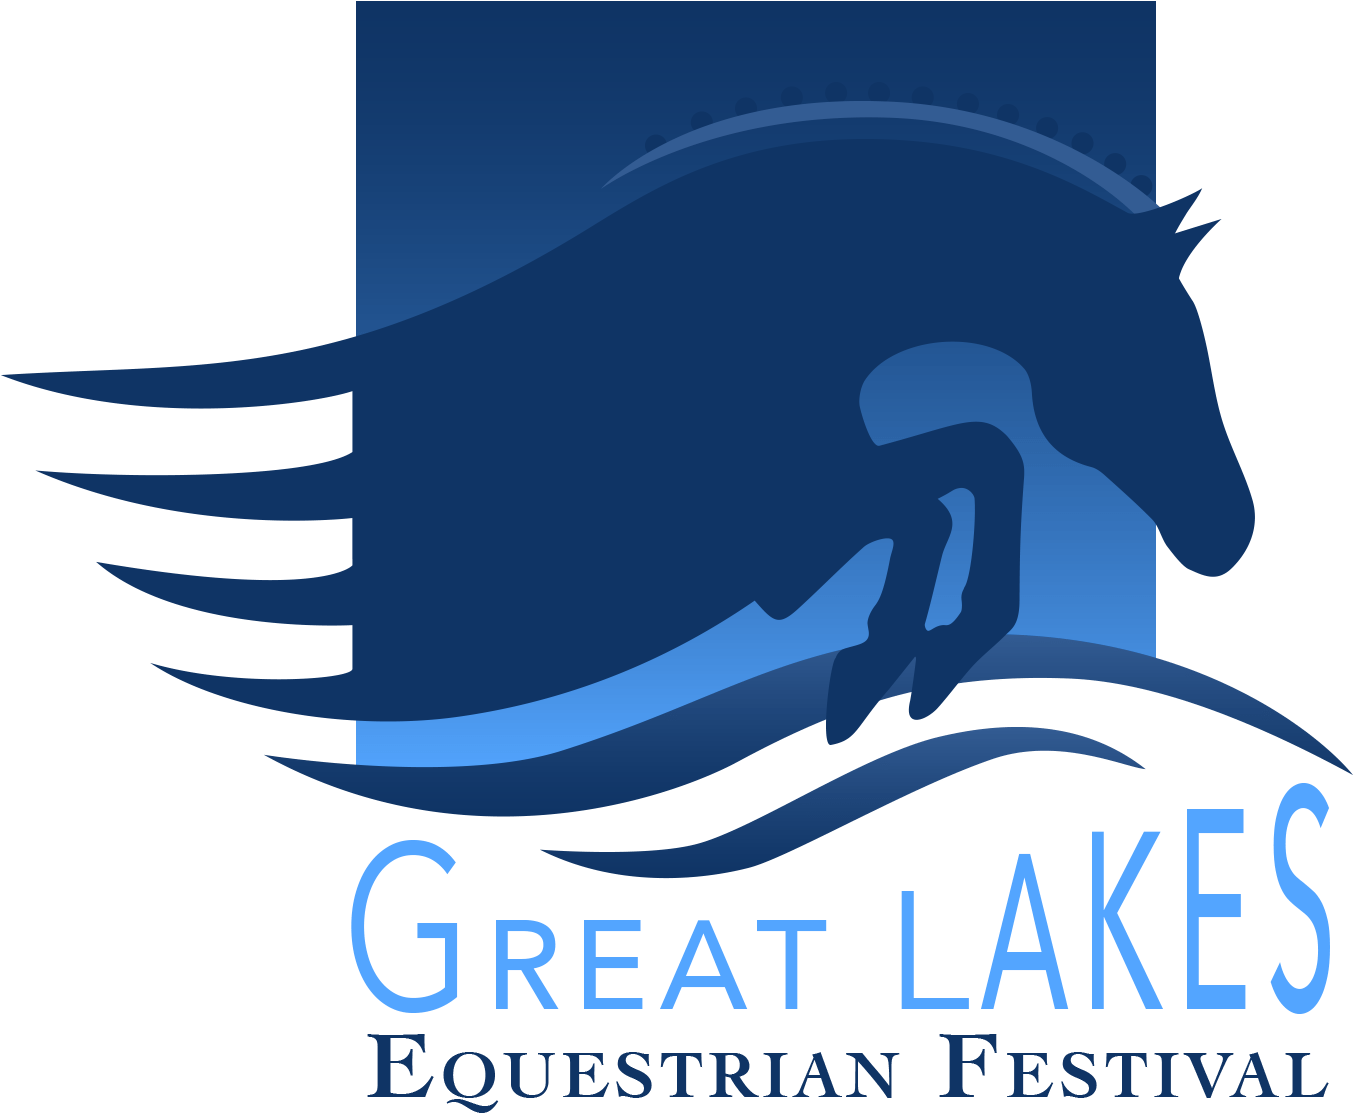 Great Lakes Equestrian Festival Logo PNG